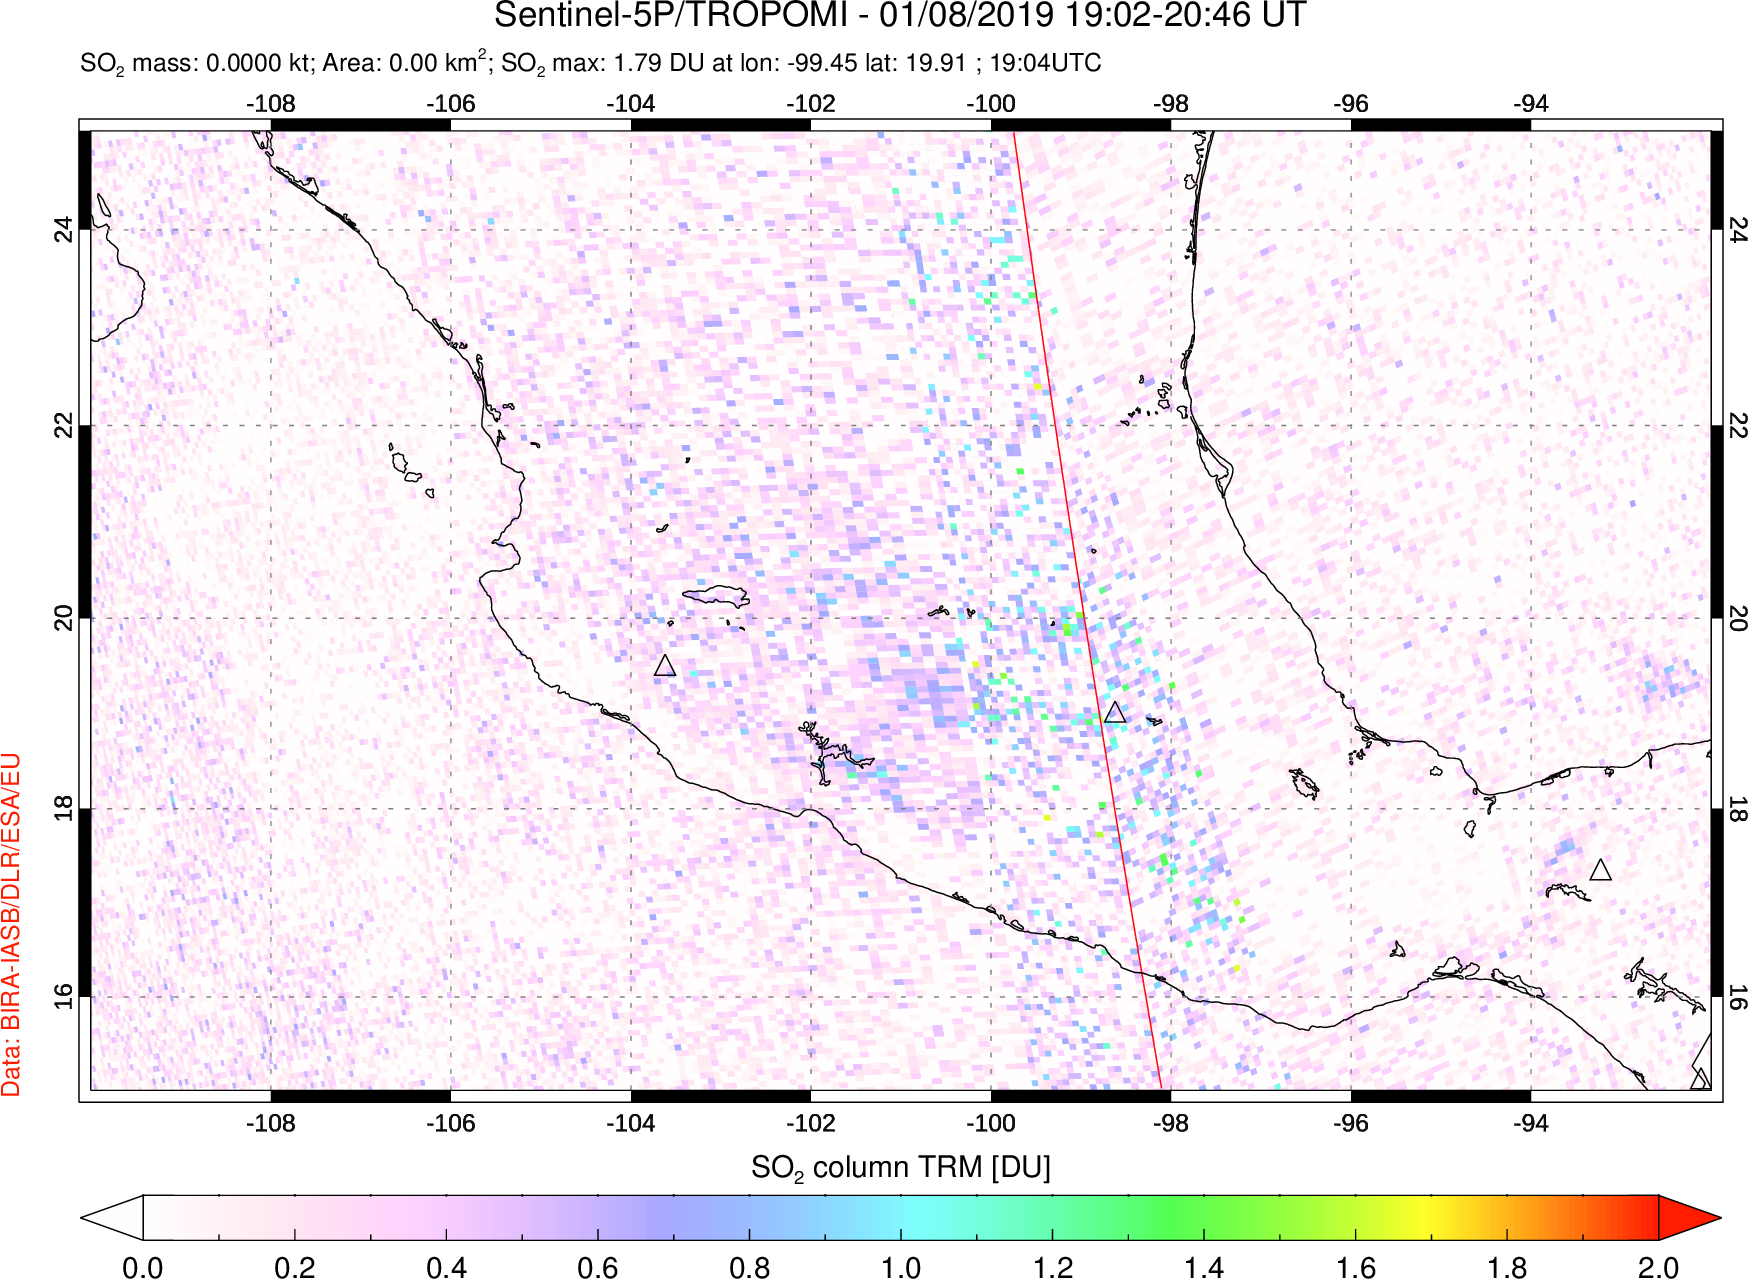 A sulfur dioxide image over Mexico on Jan 08, 2019.